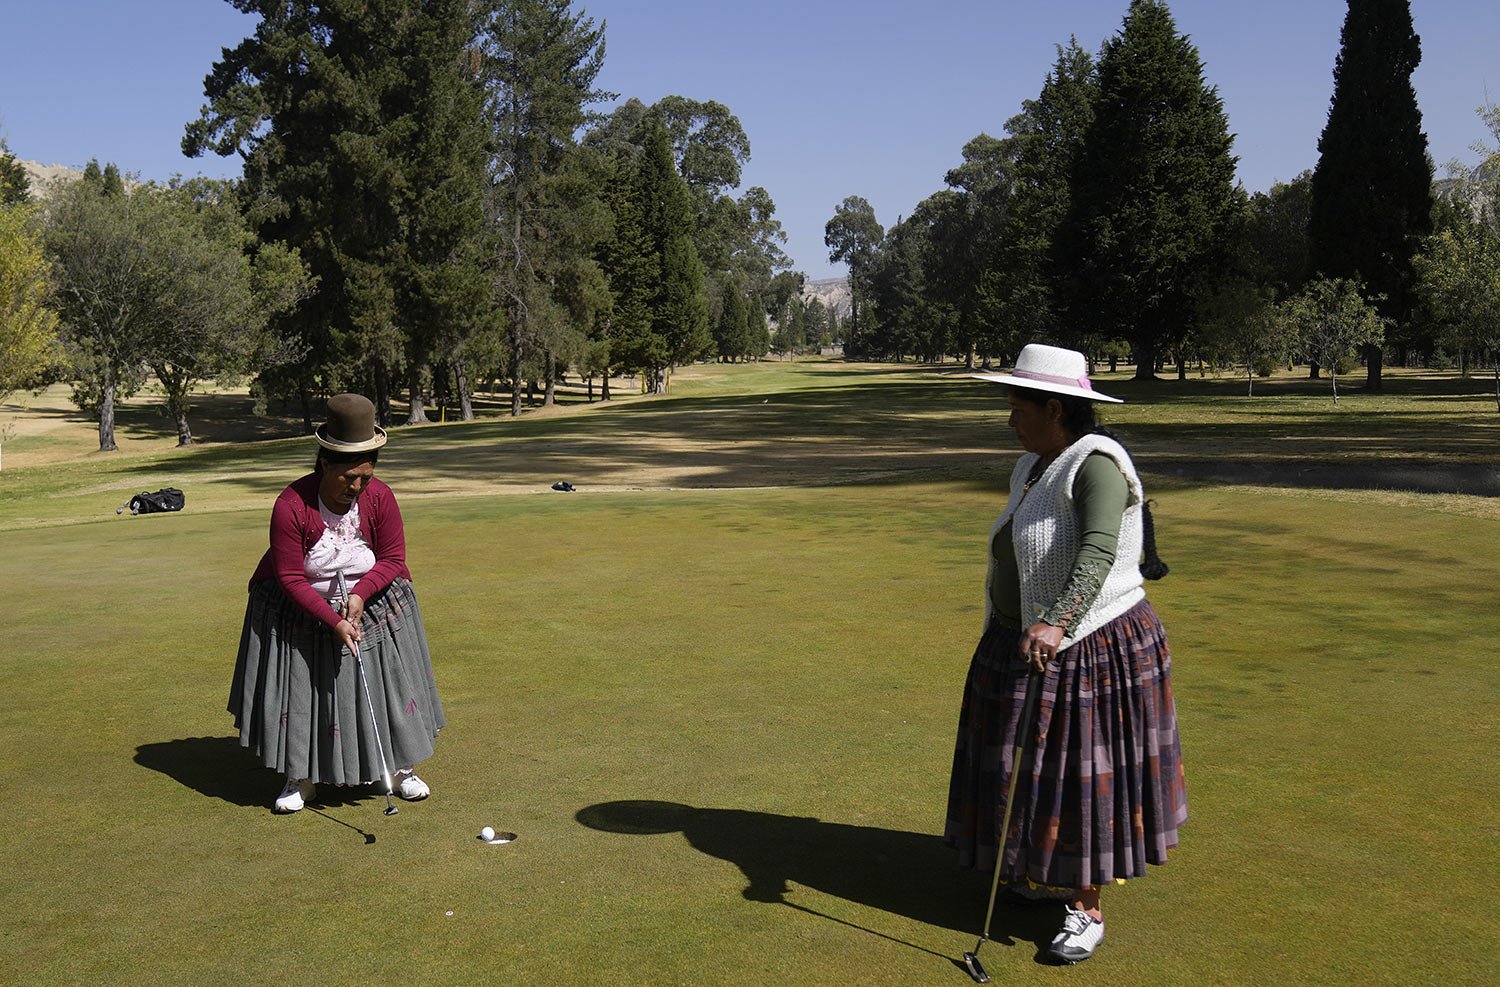  Aymara Indigenous women, Teresa Zarate, left, putts the ball while Martha Mamani watches her during the workers' tournament at the La Paz Golf Club of Mallasilla on the outskirts of La Paz, Bolivia, Monday, Aug. 1, 2022. (AP Photo/Juan Karita) 